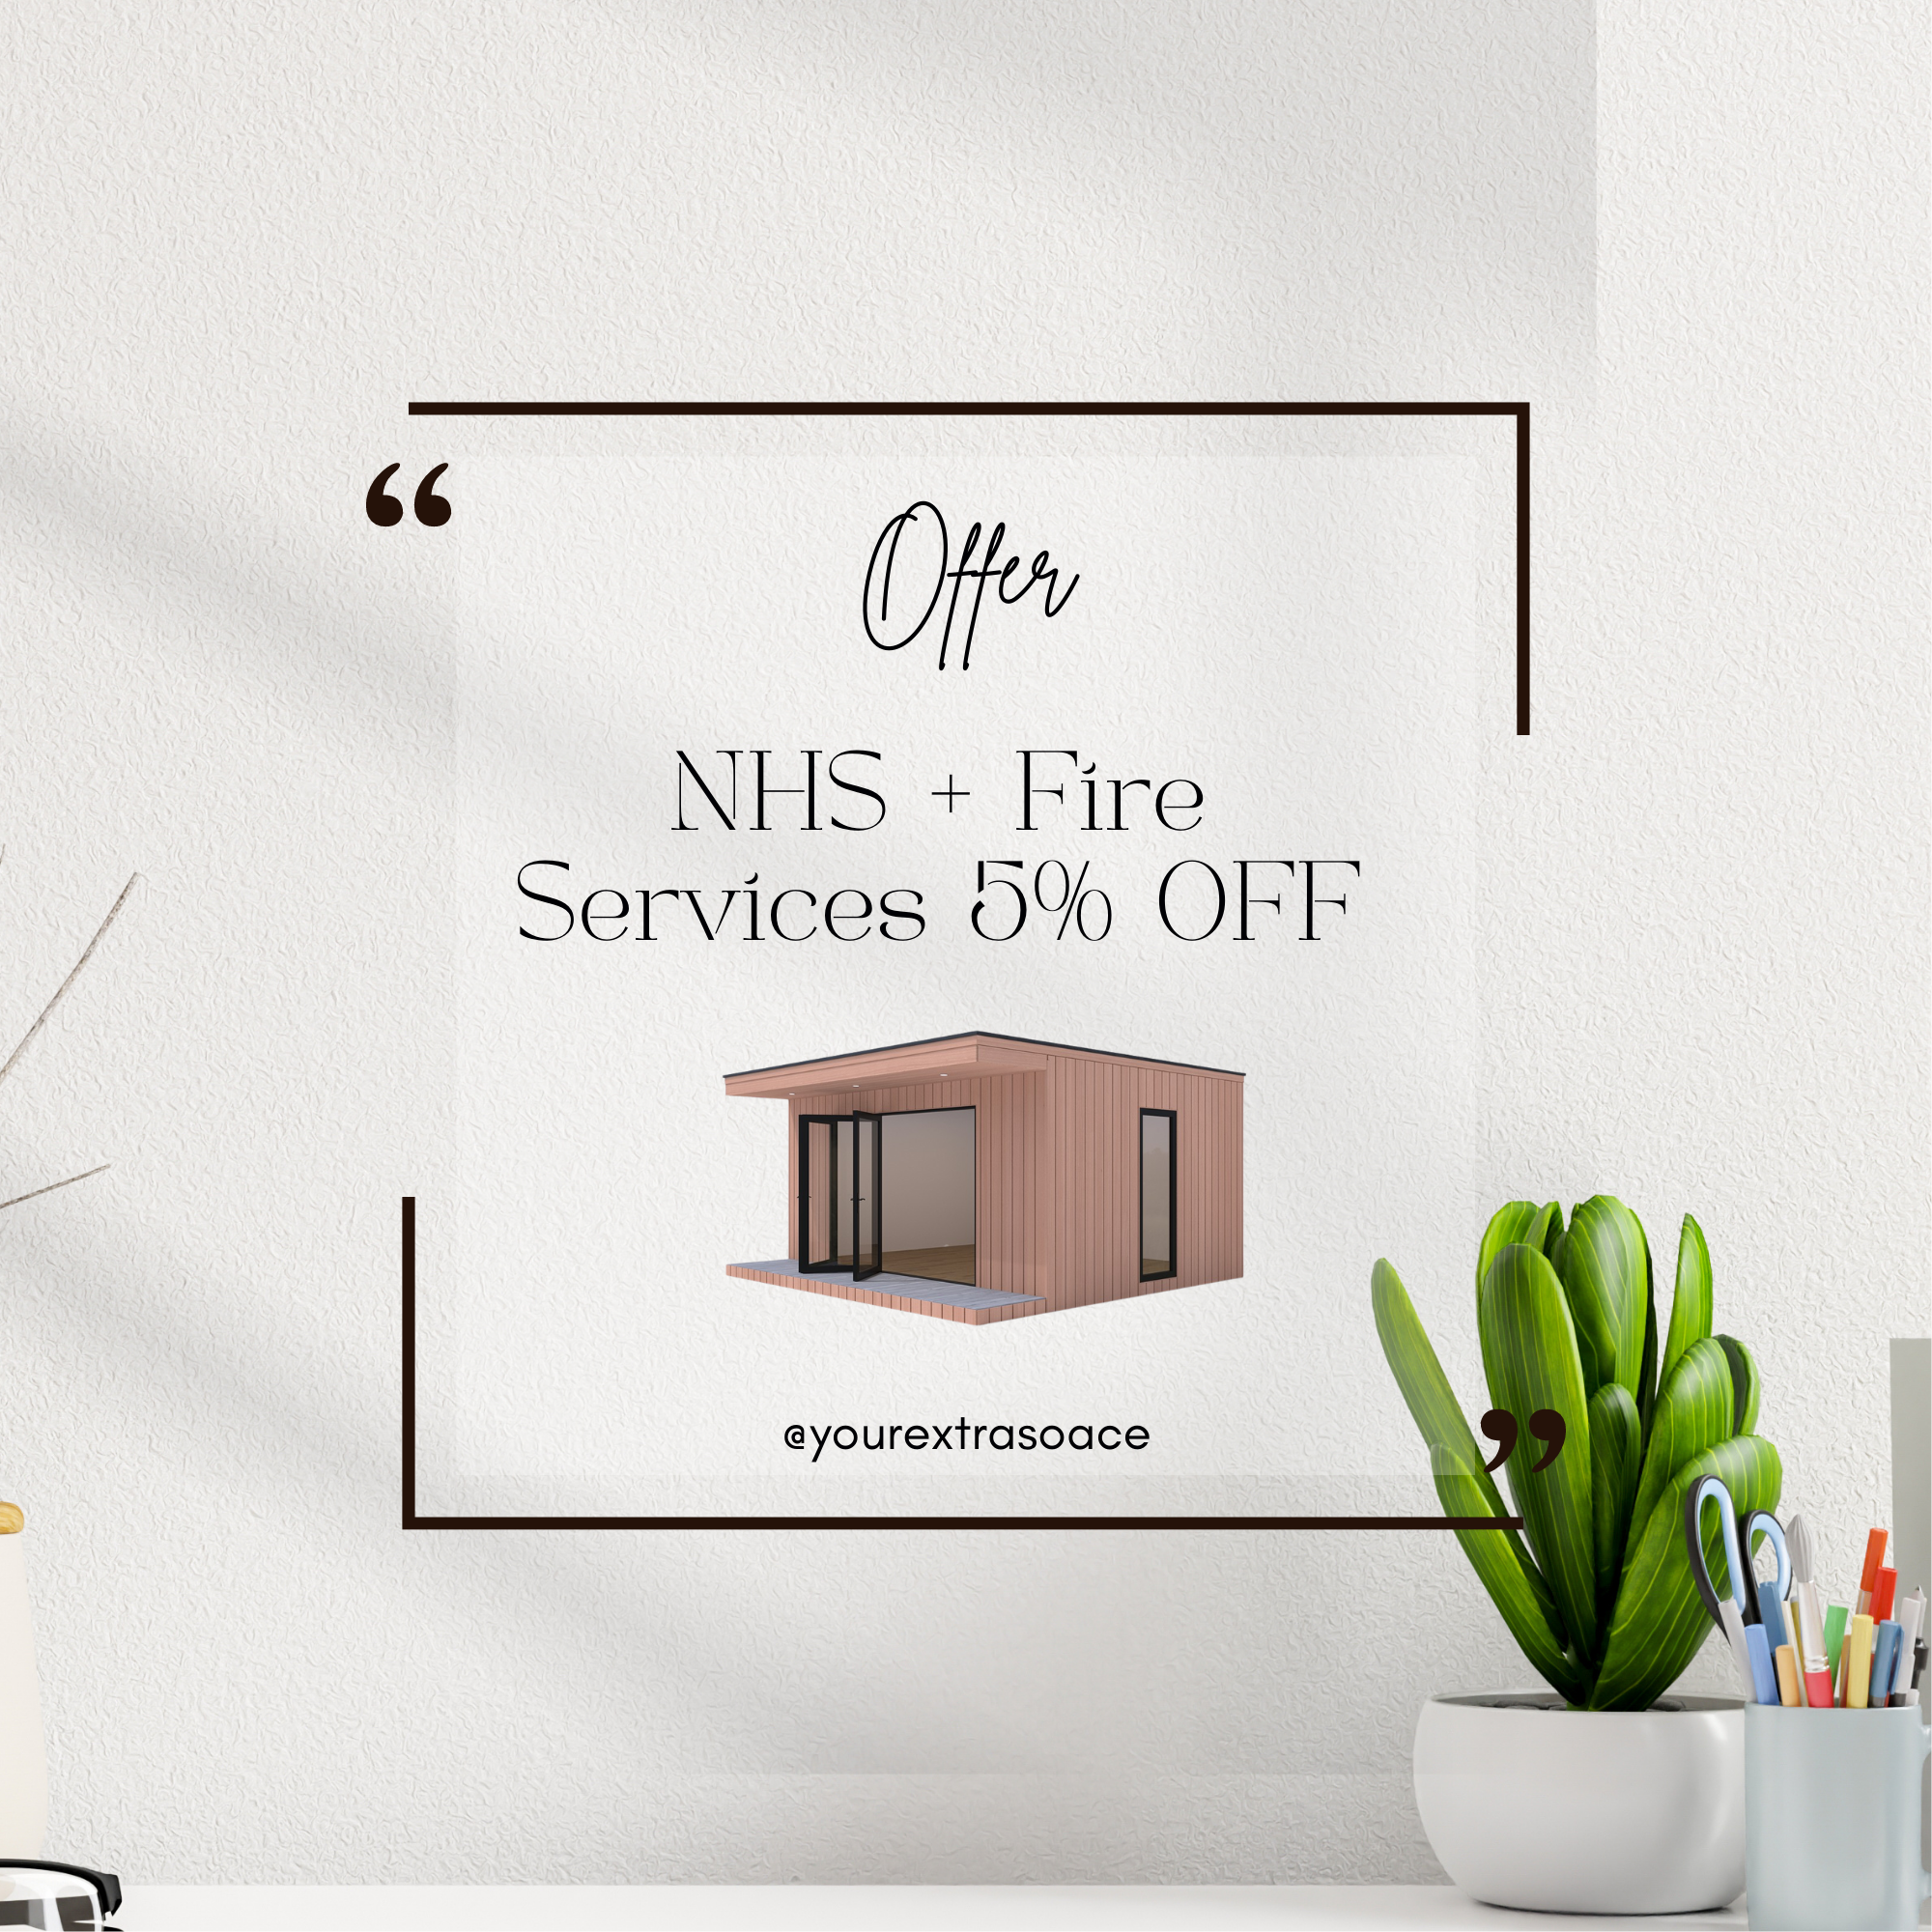 NHS + Fire Services 5% OFF